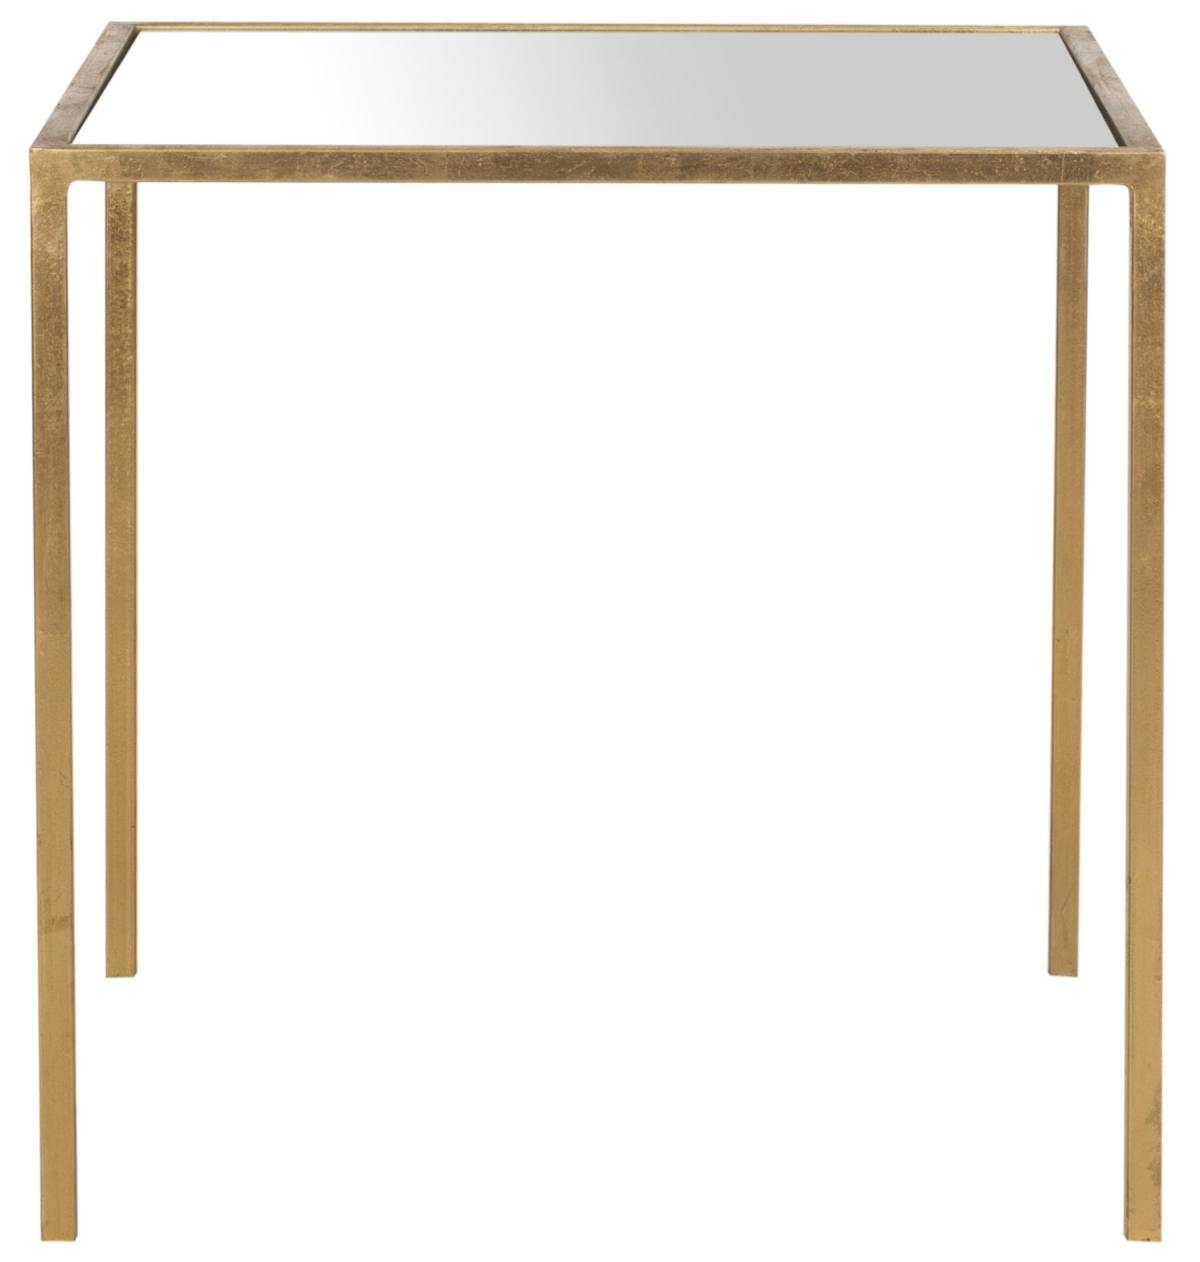 Kiley Mirror Top Accent Table - Gold - Arlo Home - Image 0